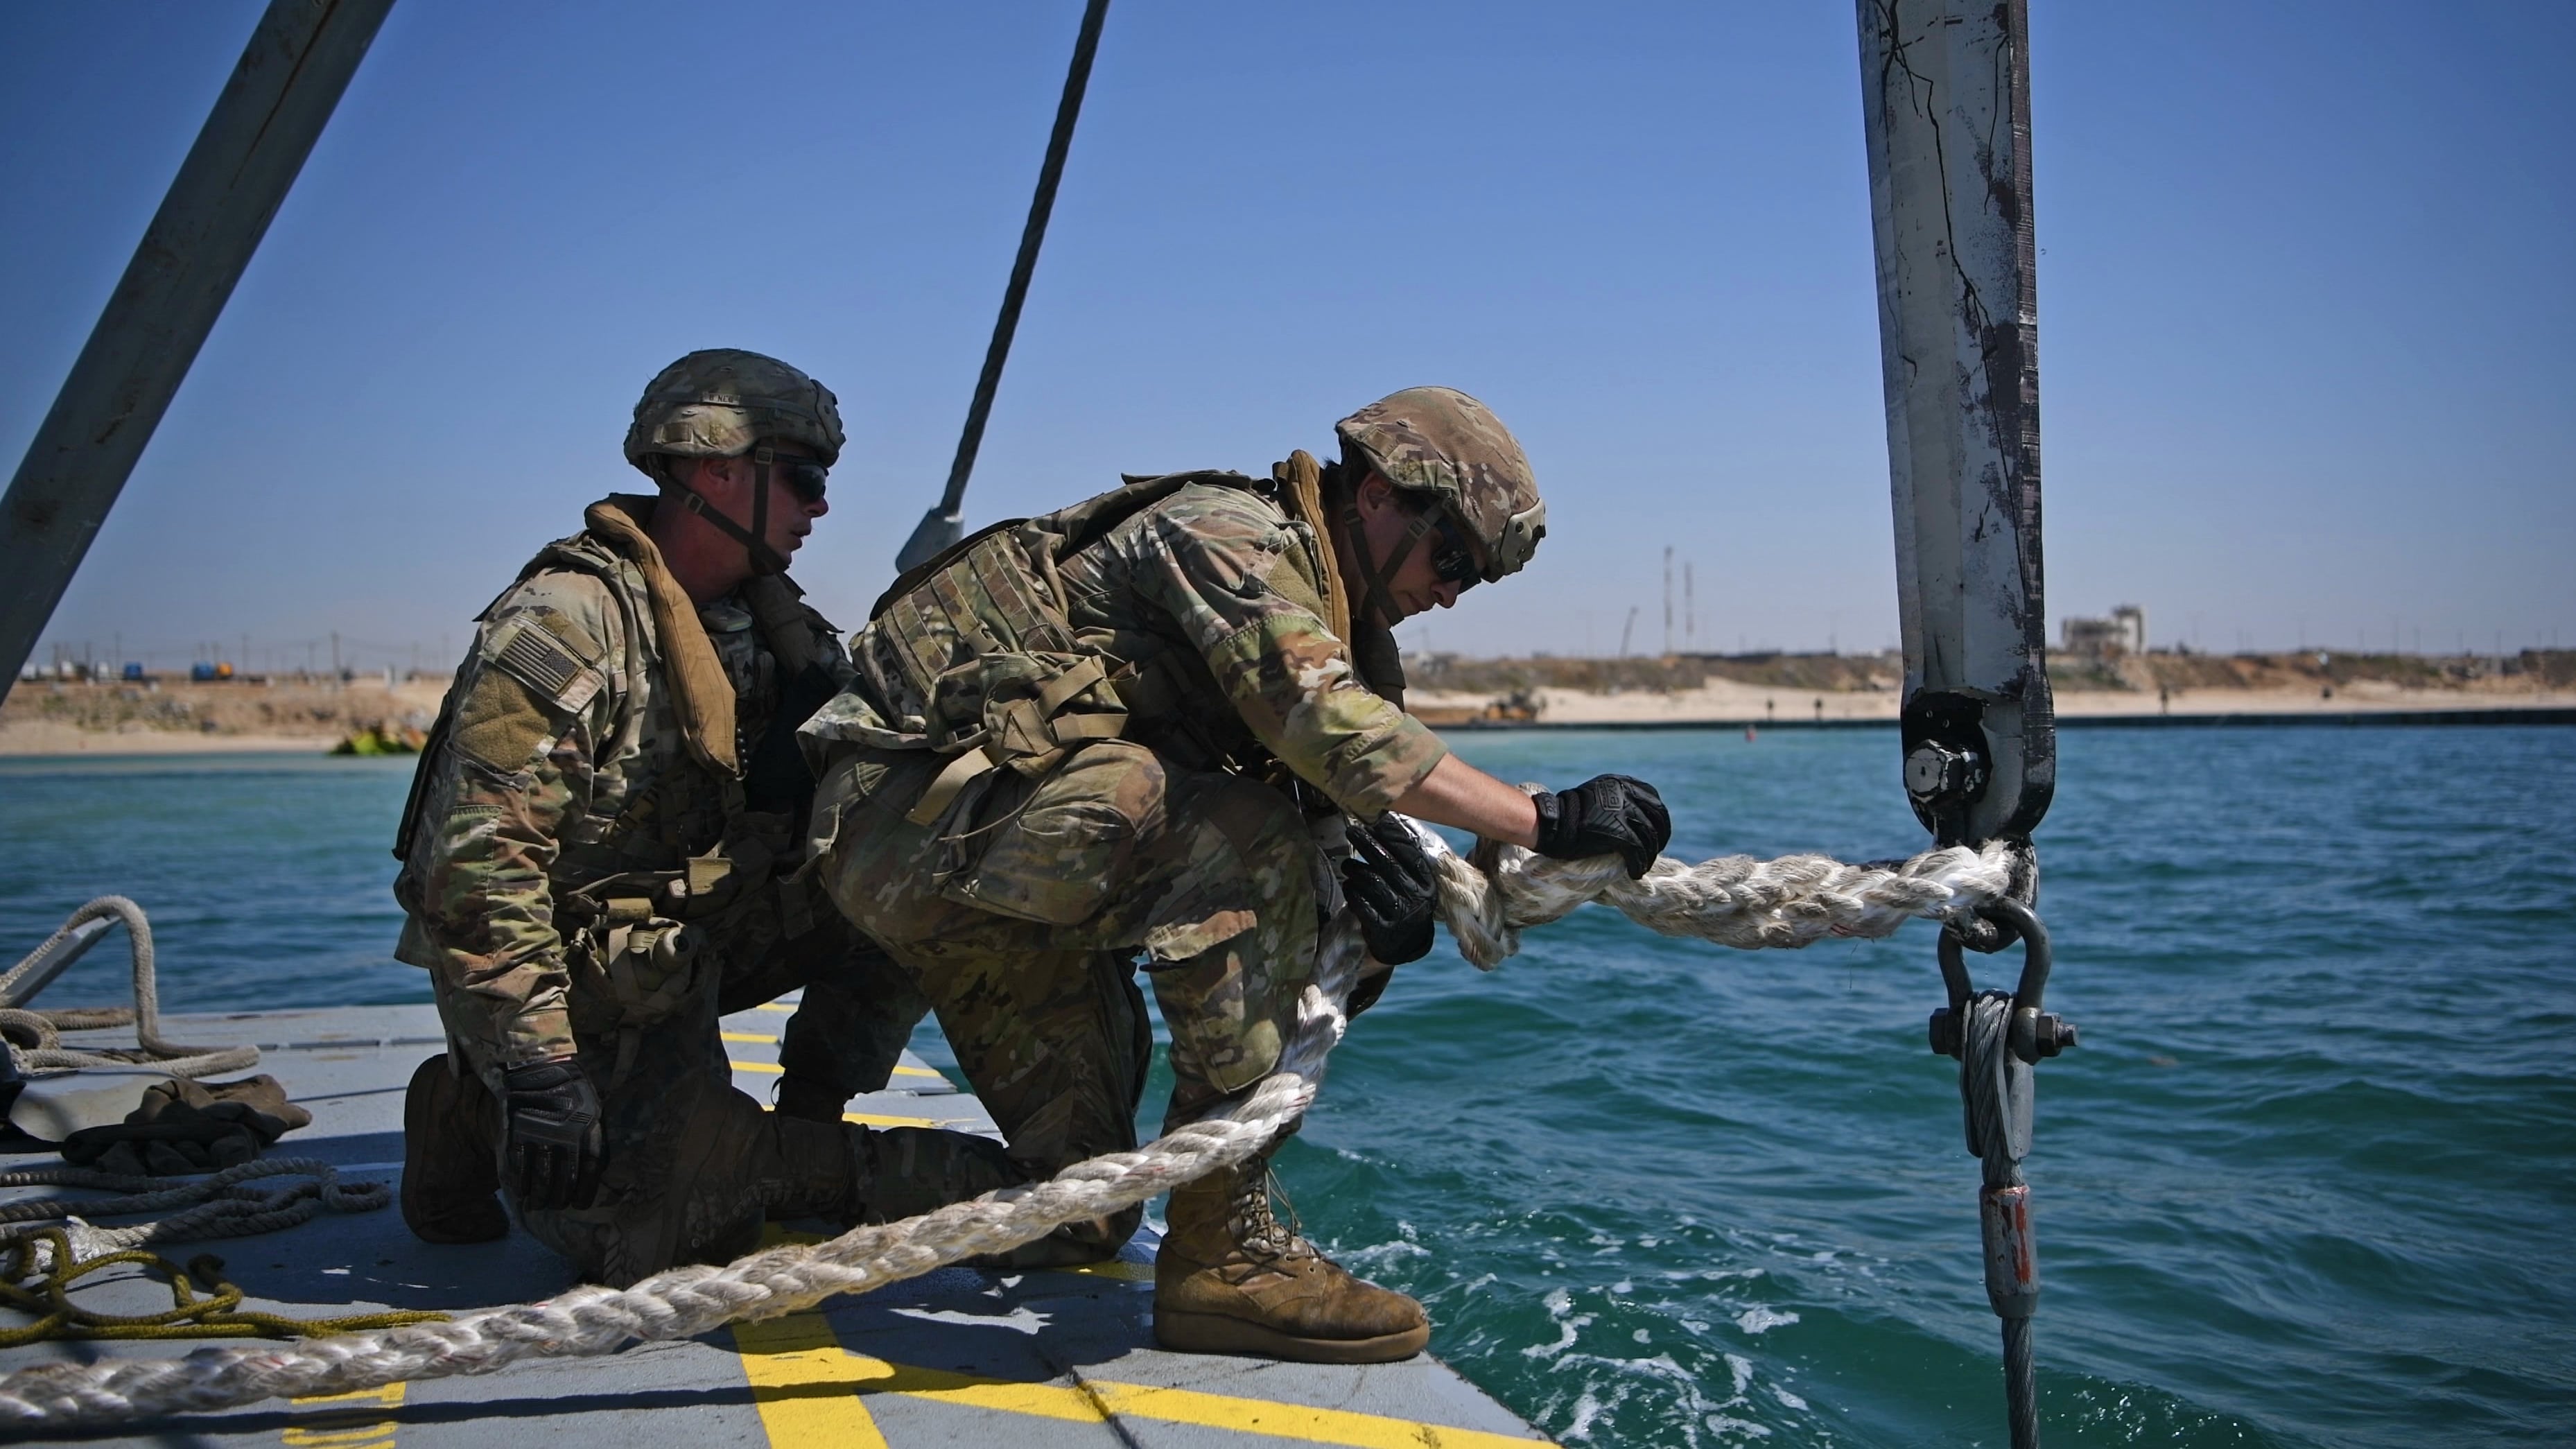 U.S. soldiers assigned to the 7th Transportation Brigade (Expeditionary) use a modular warping tug’s crane to drop temporary anchors to stabilize the aid pier on the Gaza coast on June 7. (Mass Communication Specialist 1st Class Jordan  KirkJohnson/Navy)